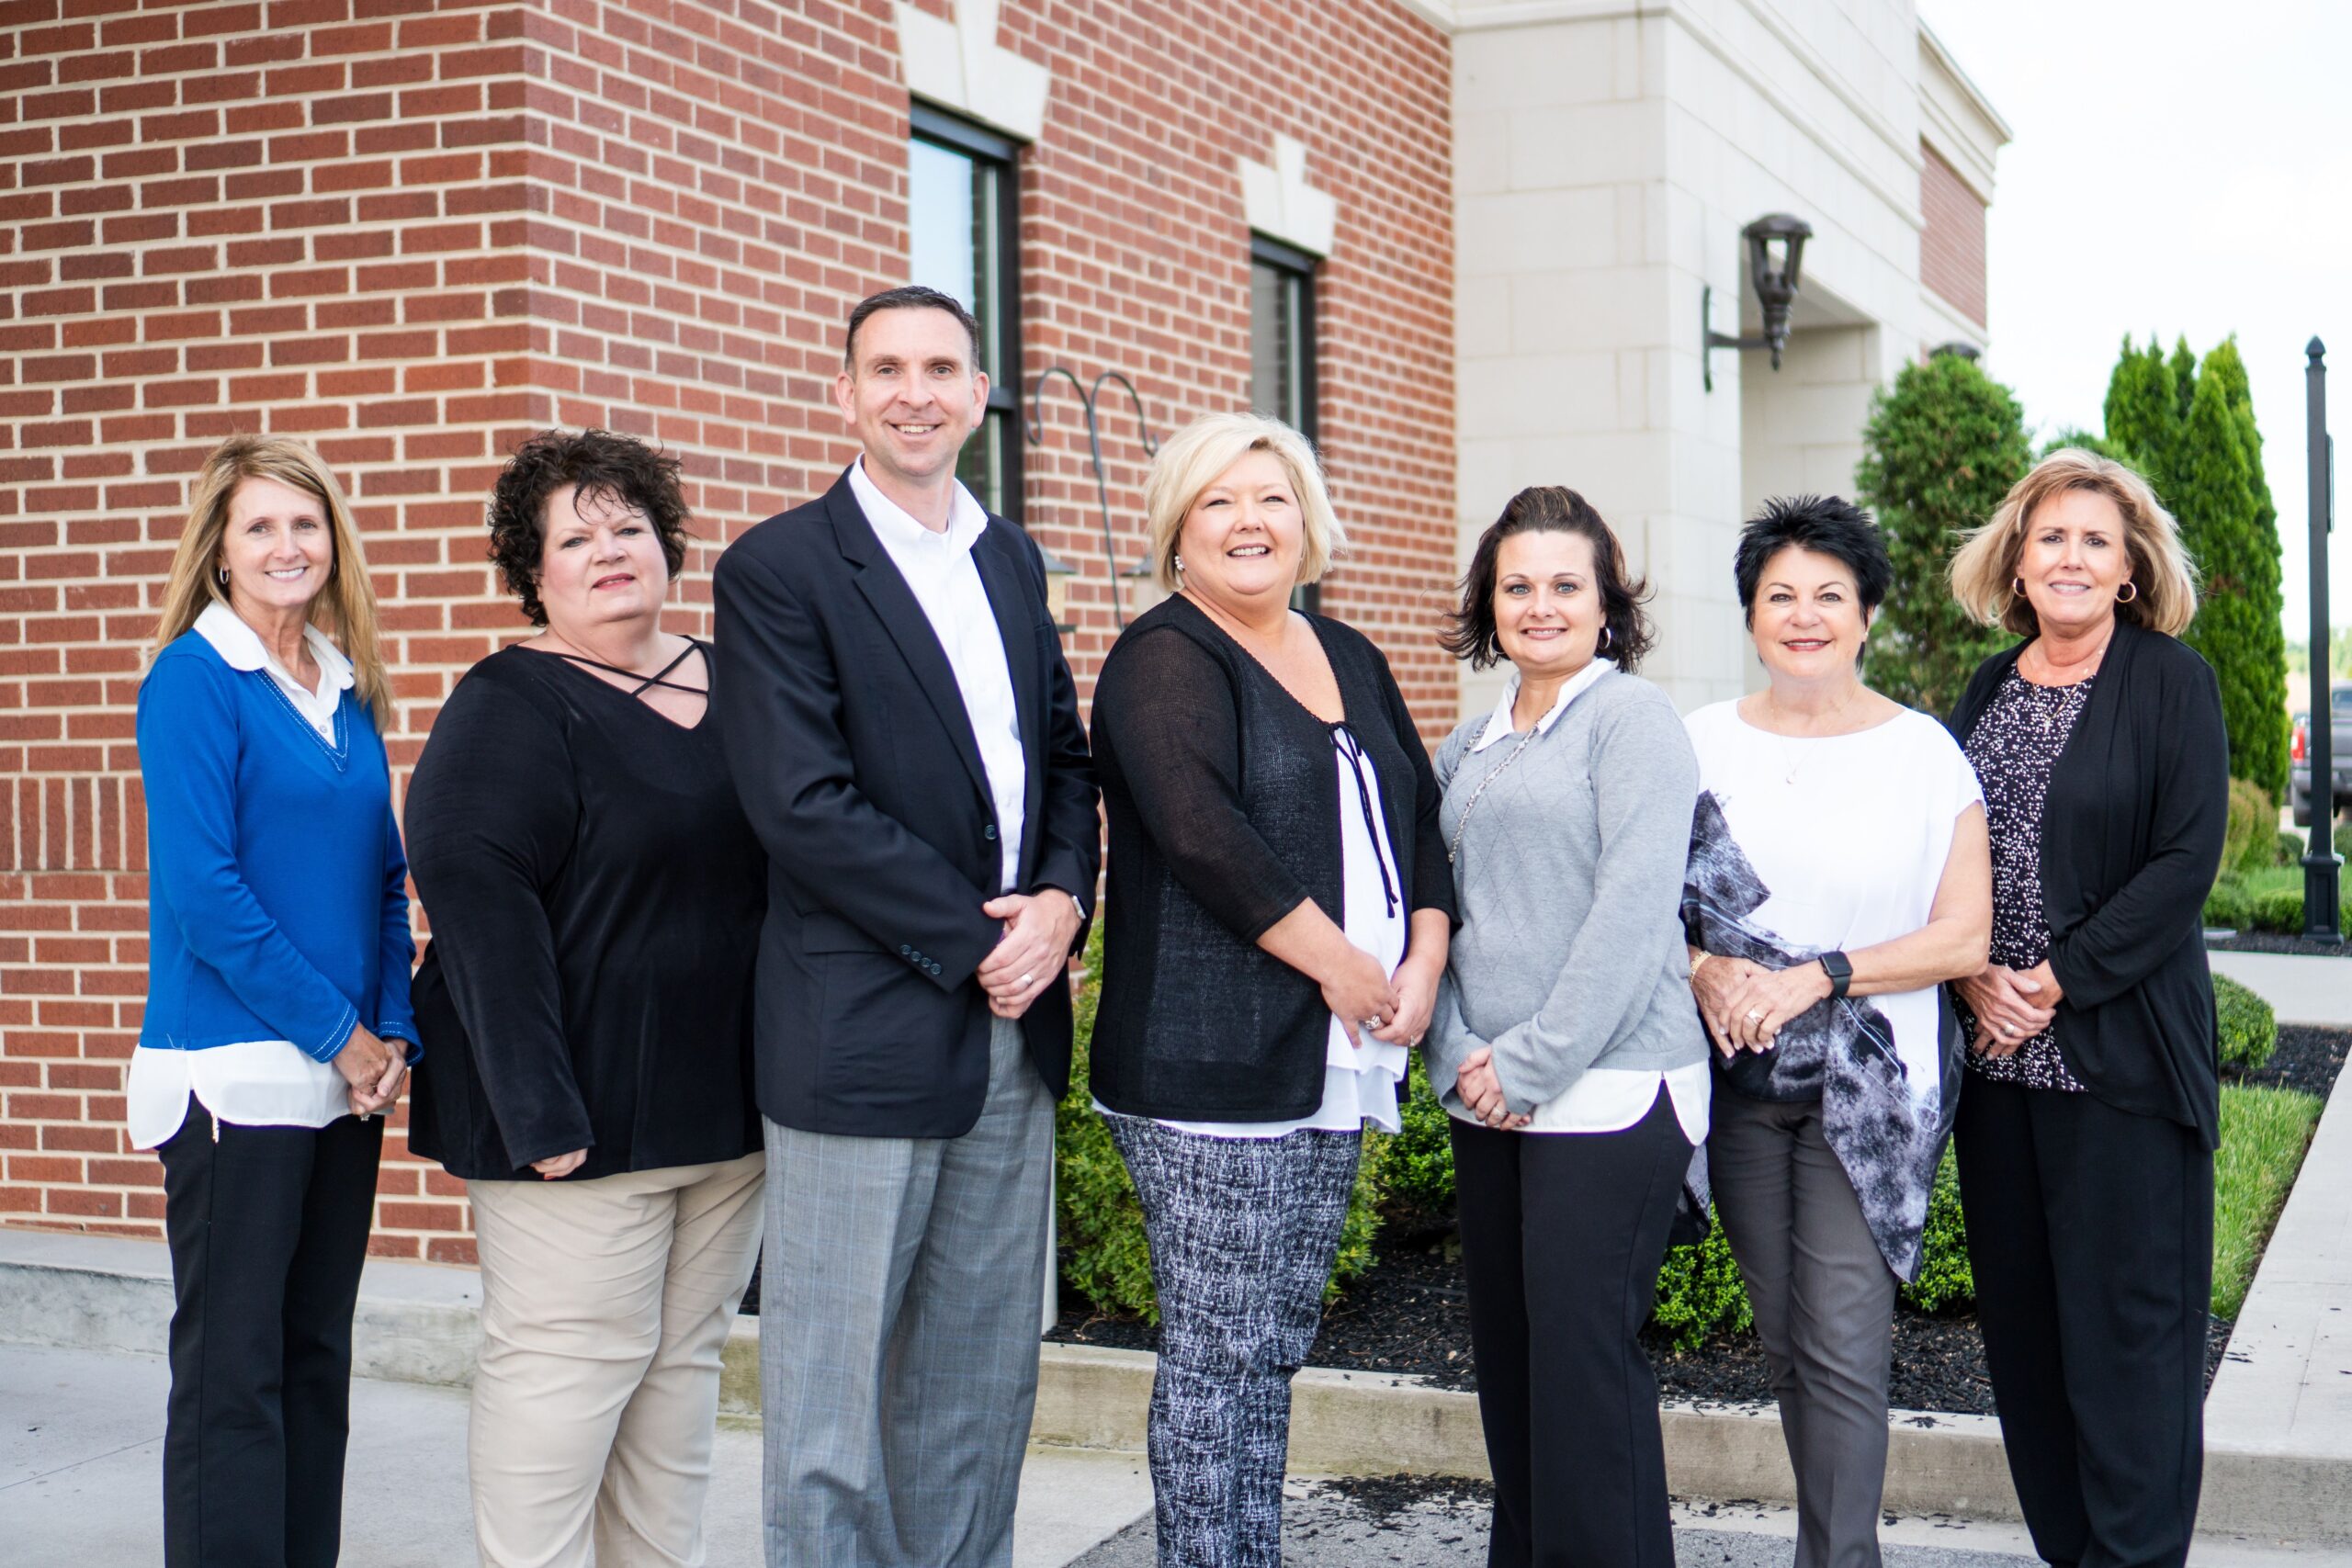 Get to Know the Lenoir City Team